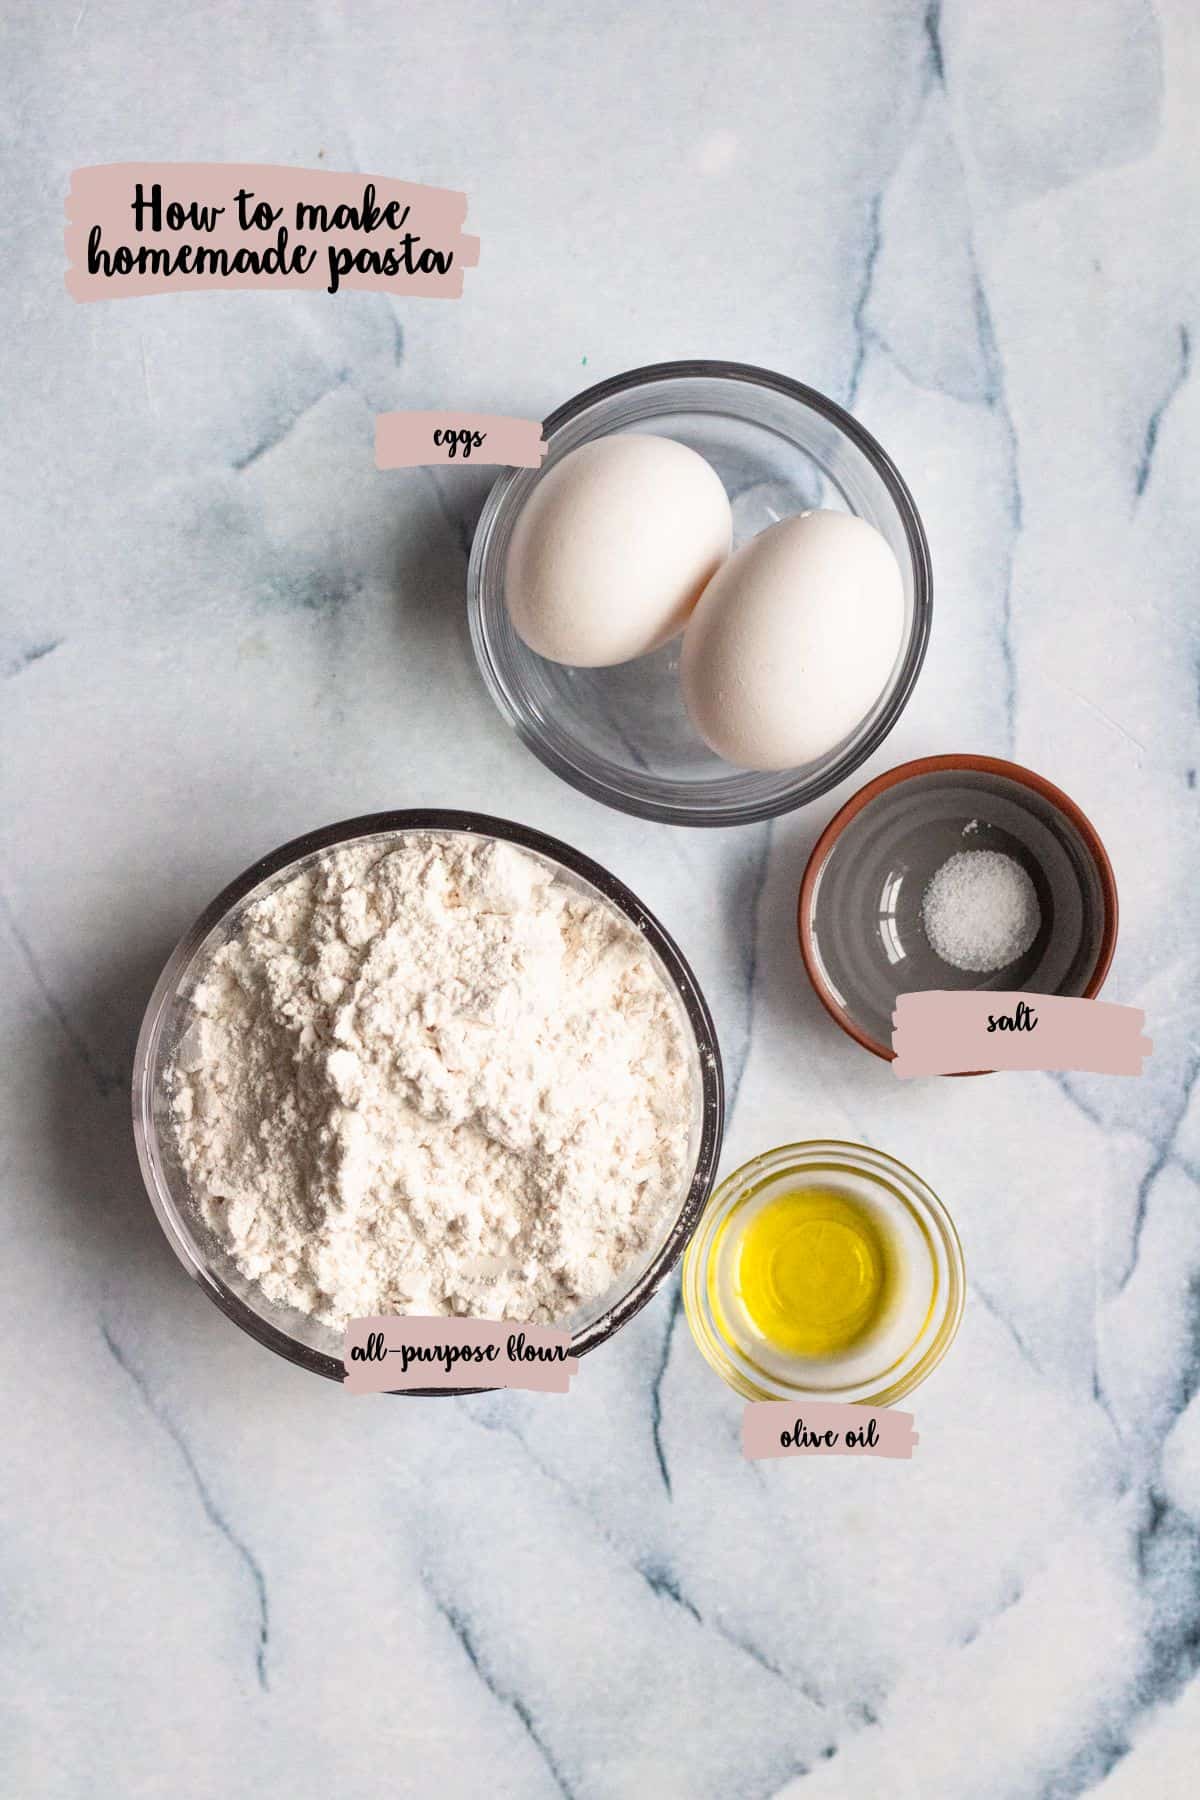 Ingredients shown that are needed to make homemade pasta. 